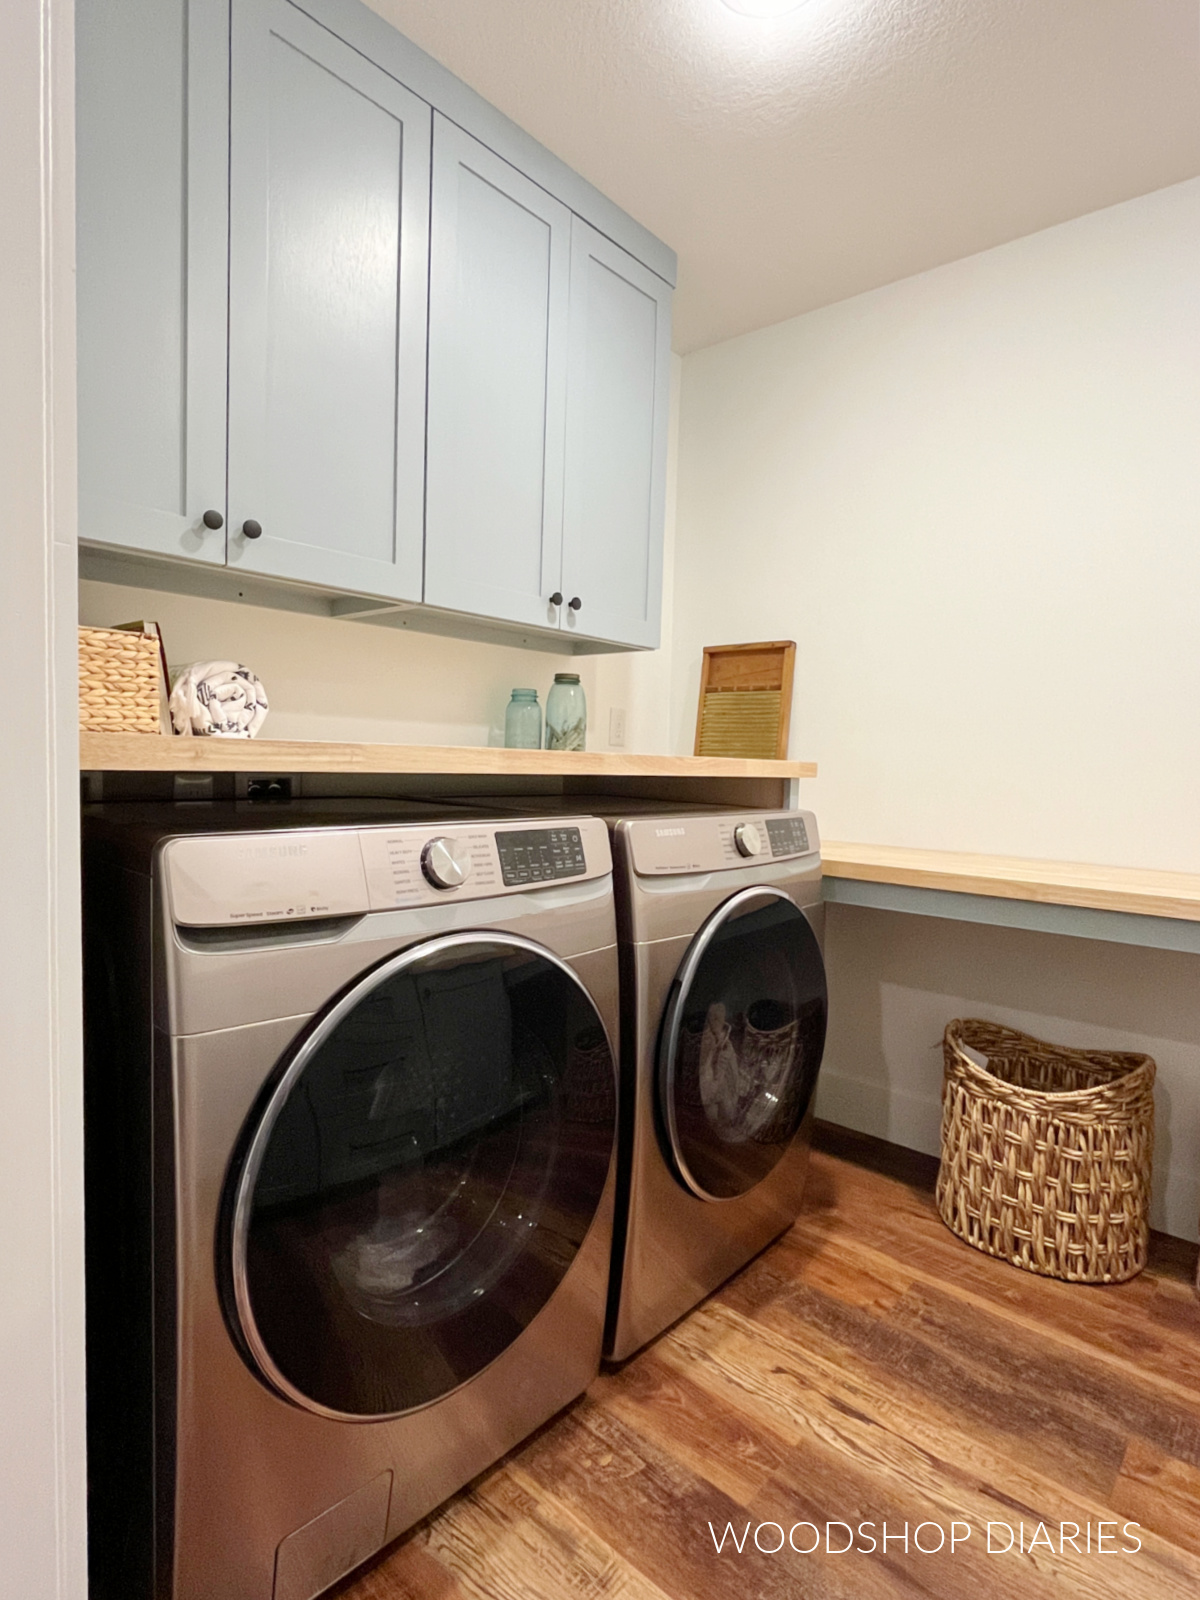 Washer and dryer with countertop and wall cabinets above it